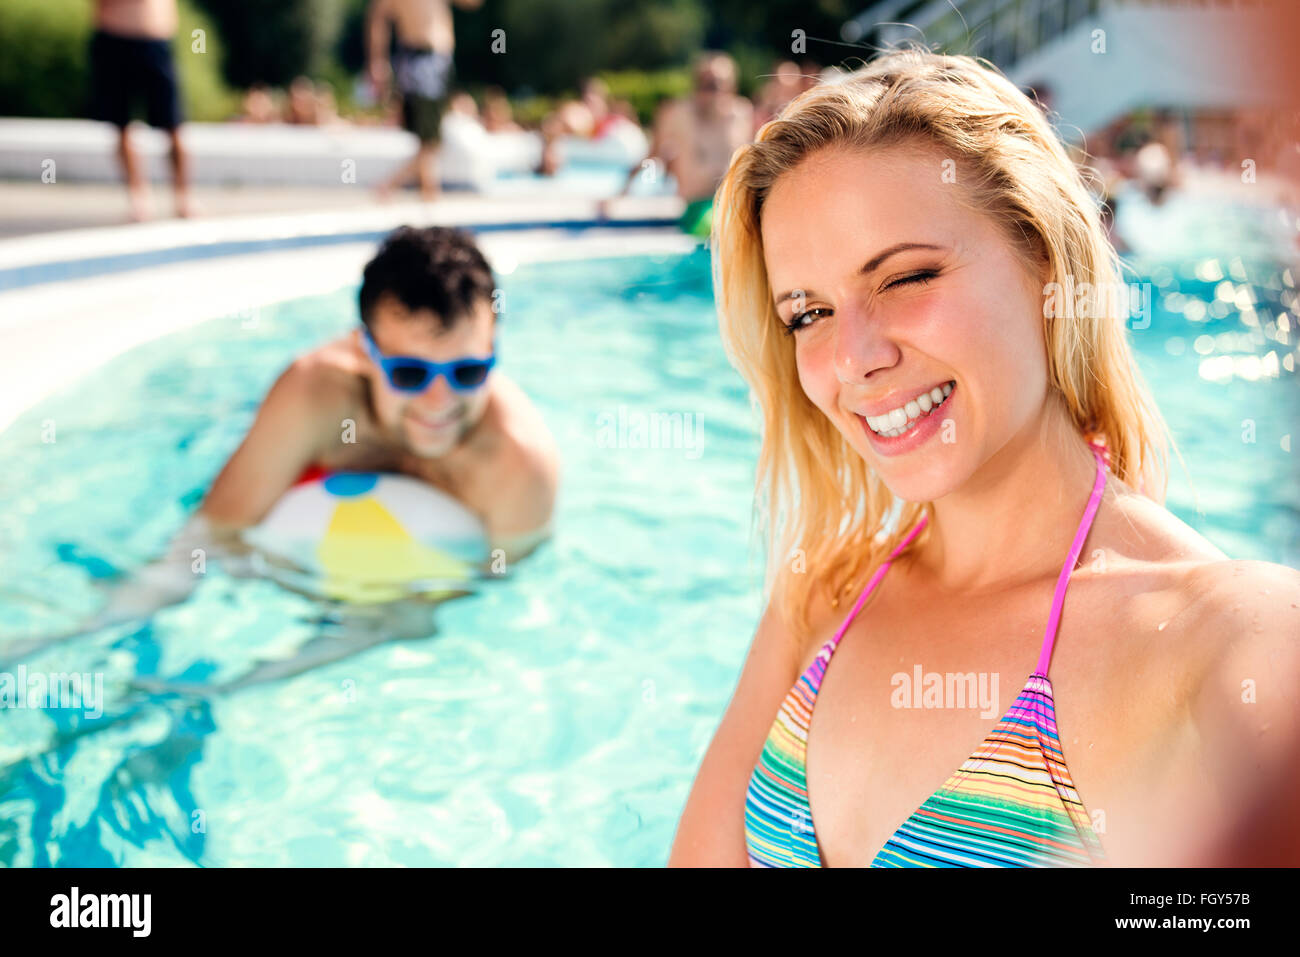 https://c8.alamy.com/comp/FGY57B/couple-in-the-swimming-pool-taking-selfie-summer-and-water-FGY57B.jpg